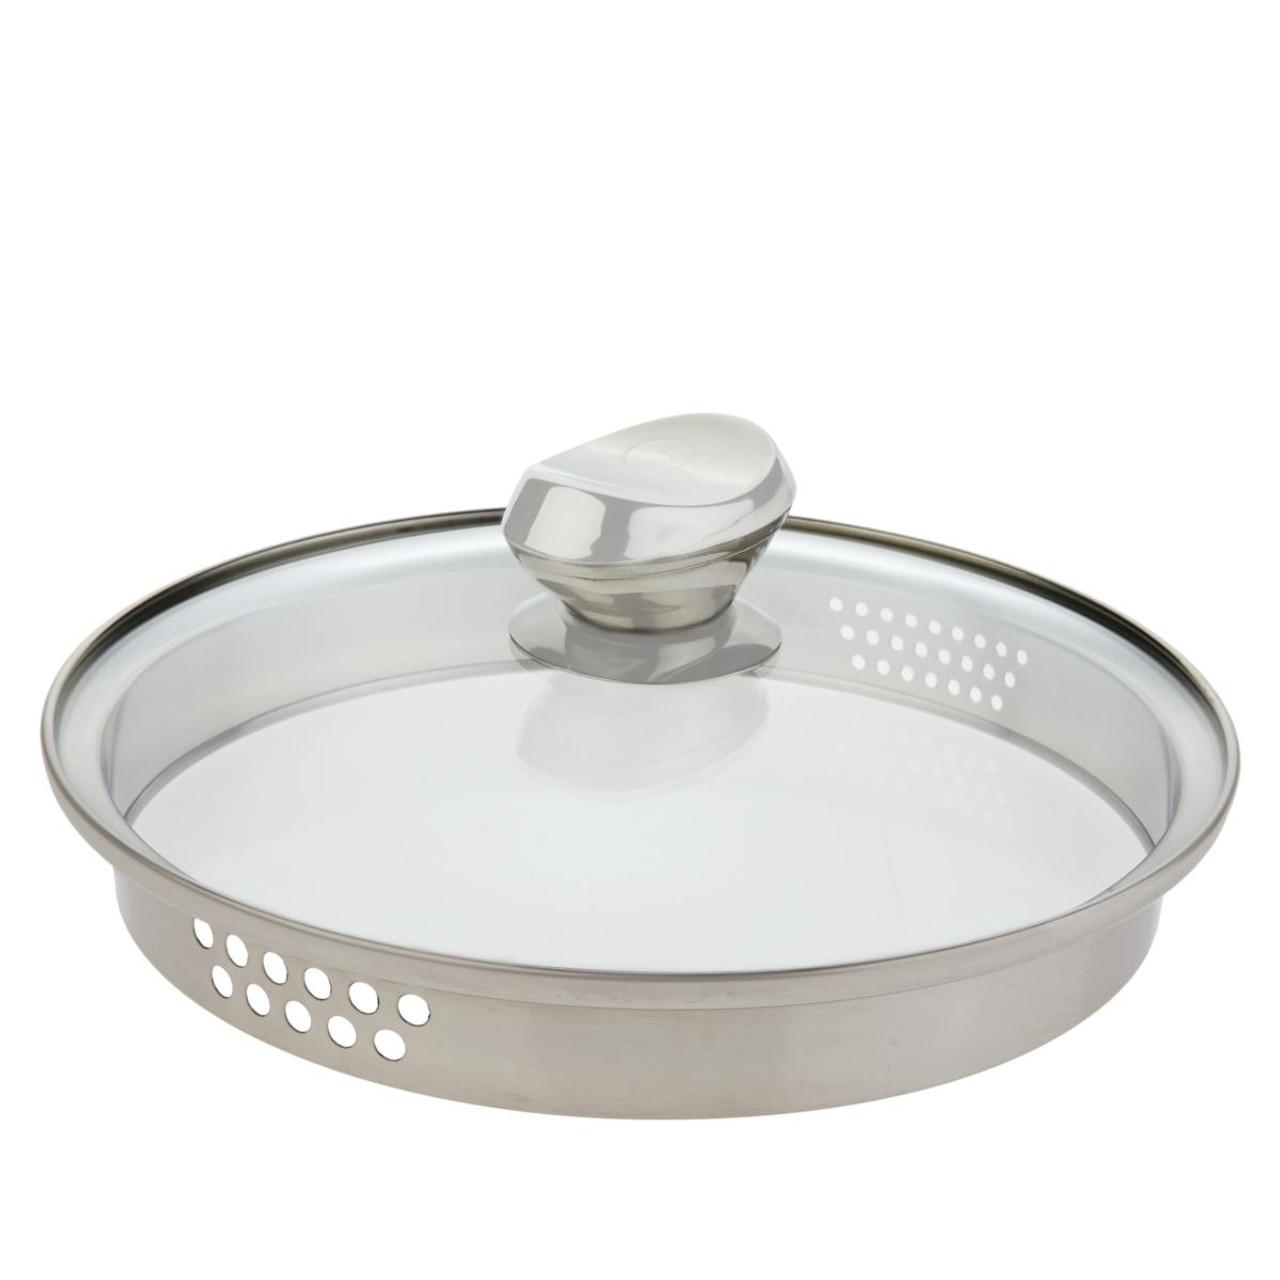 Wolfgang Puck Stainless Steel Pot